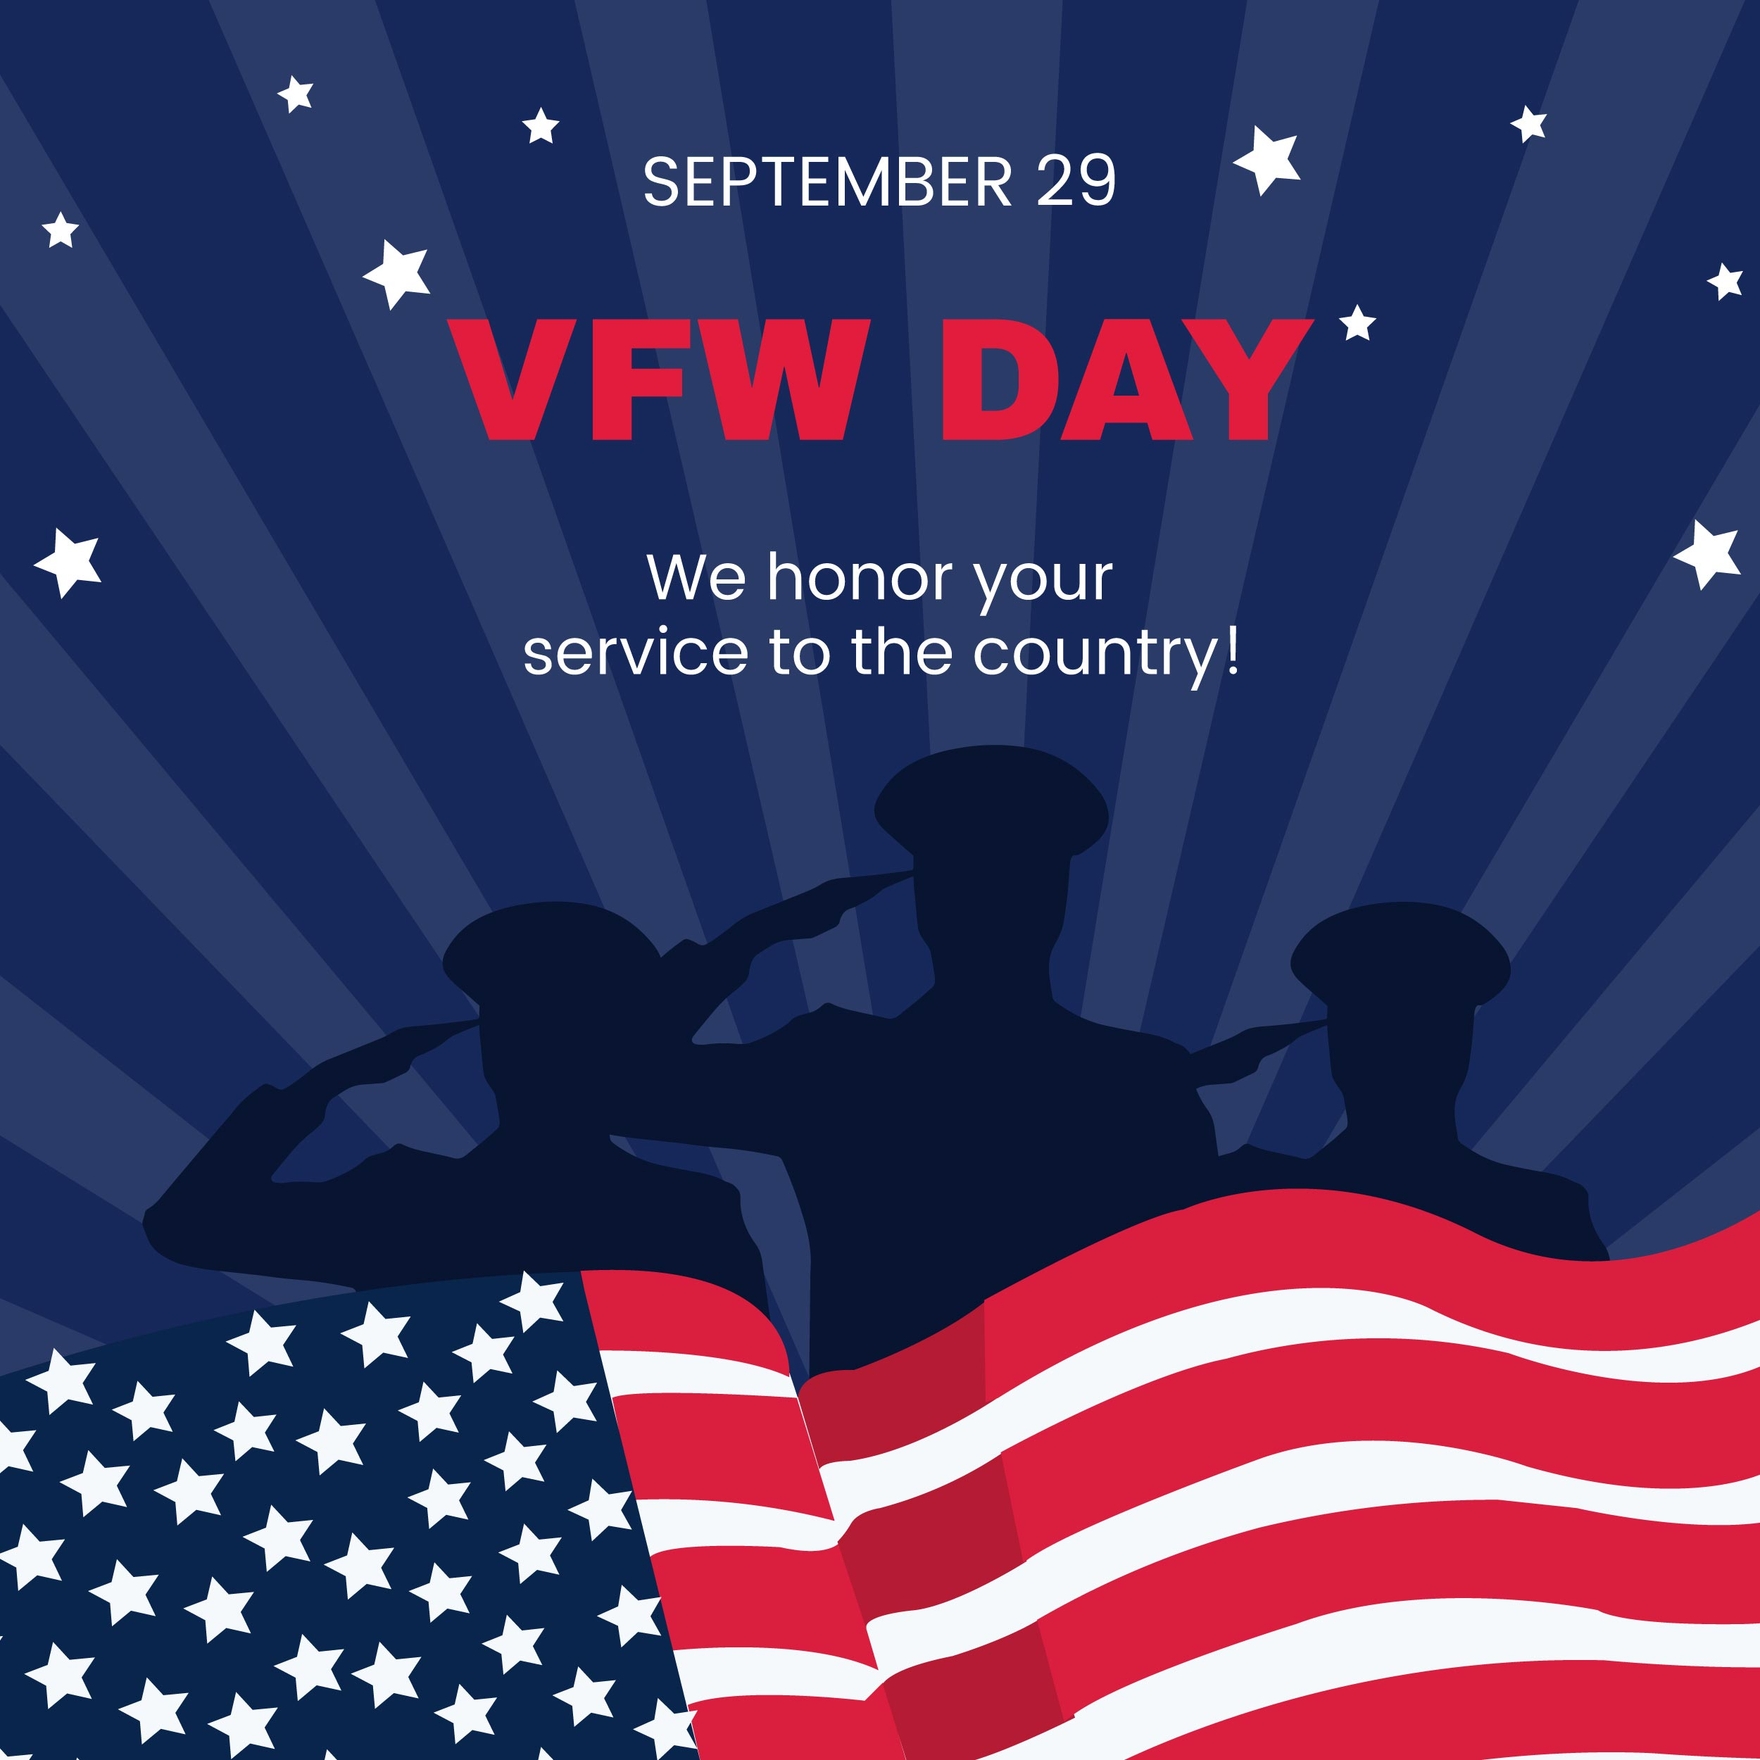 FREE VFW Day Template Download in PDF, Illustrator, EPS